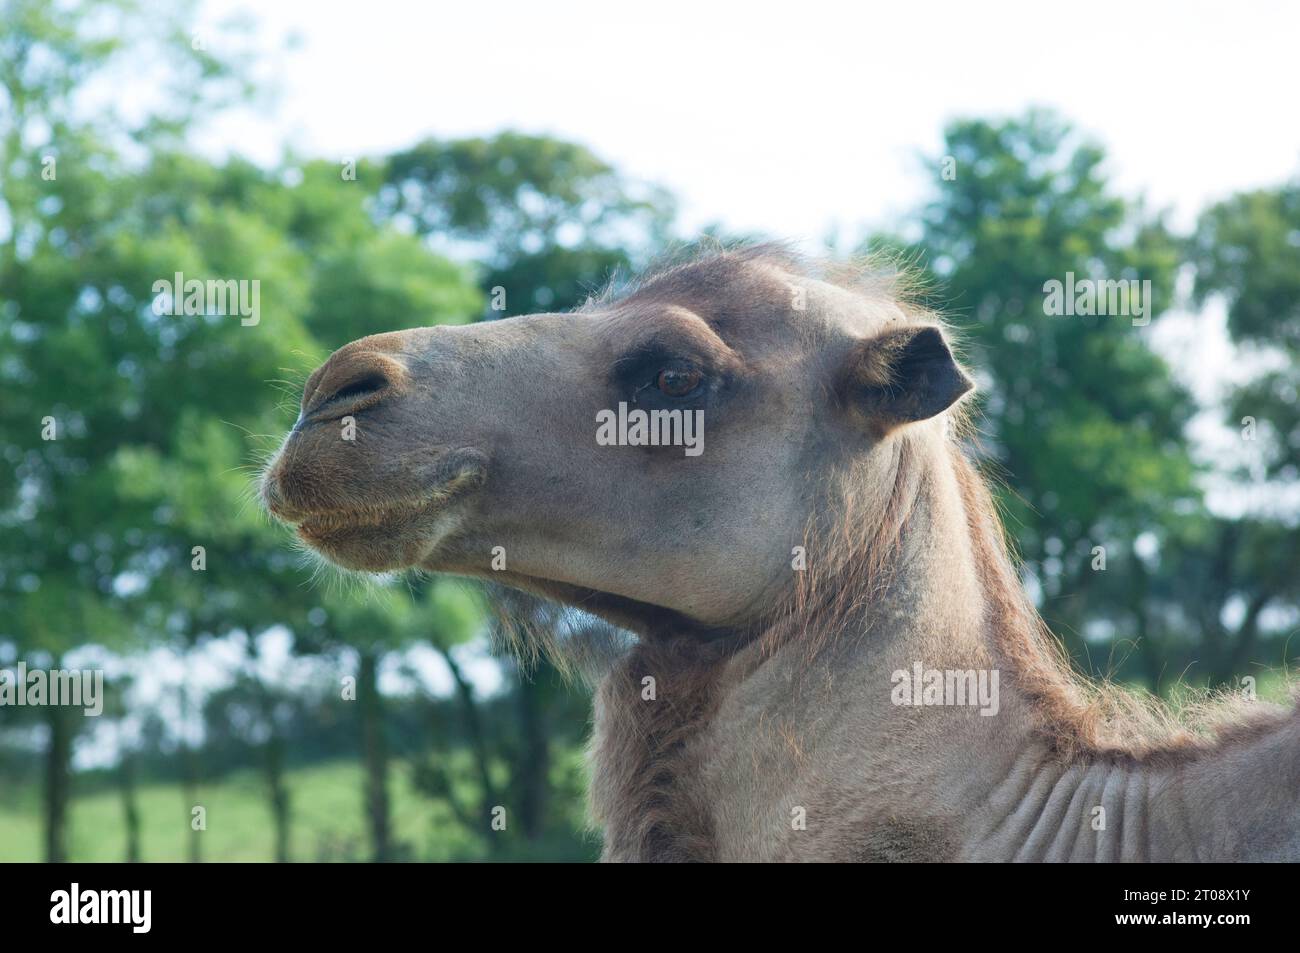 Close-up of a camel's face shot on a farm in the UK - John Gollop Stock Photo